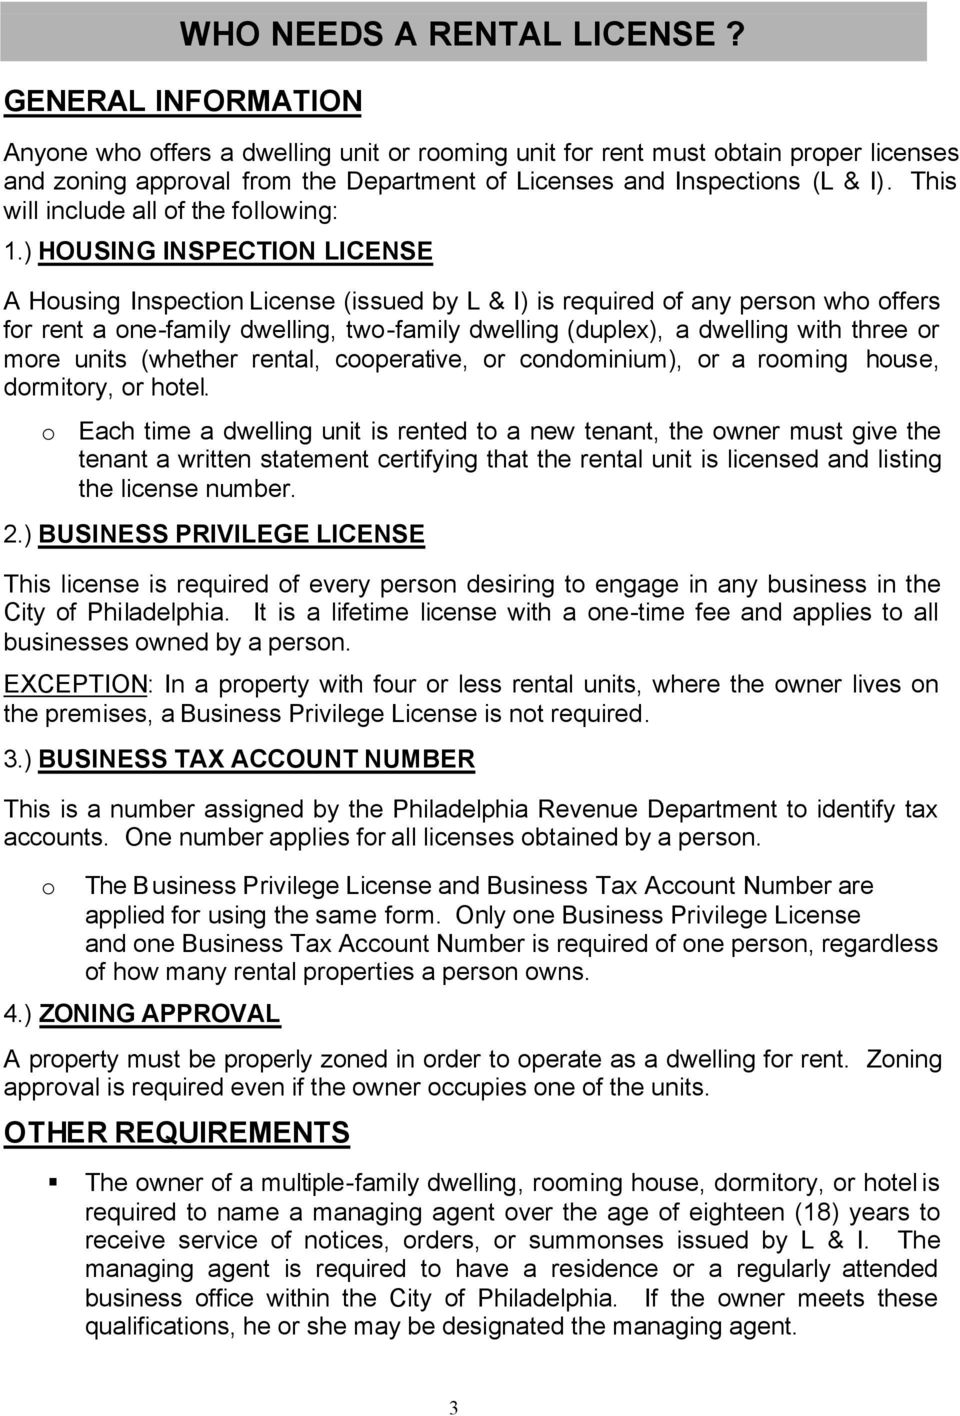 ) HOUSING INSPECTION LICENSE A Housing Inspection License (issued by L & I) is required of any person who offers for rent a one-family dwelling, two-family dwelling (duplex), a dwelling with three or